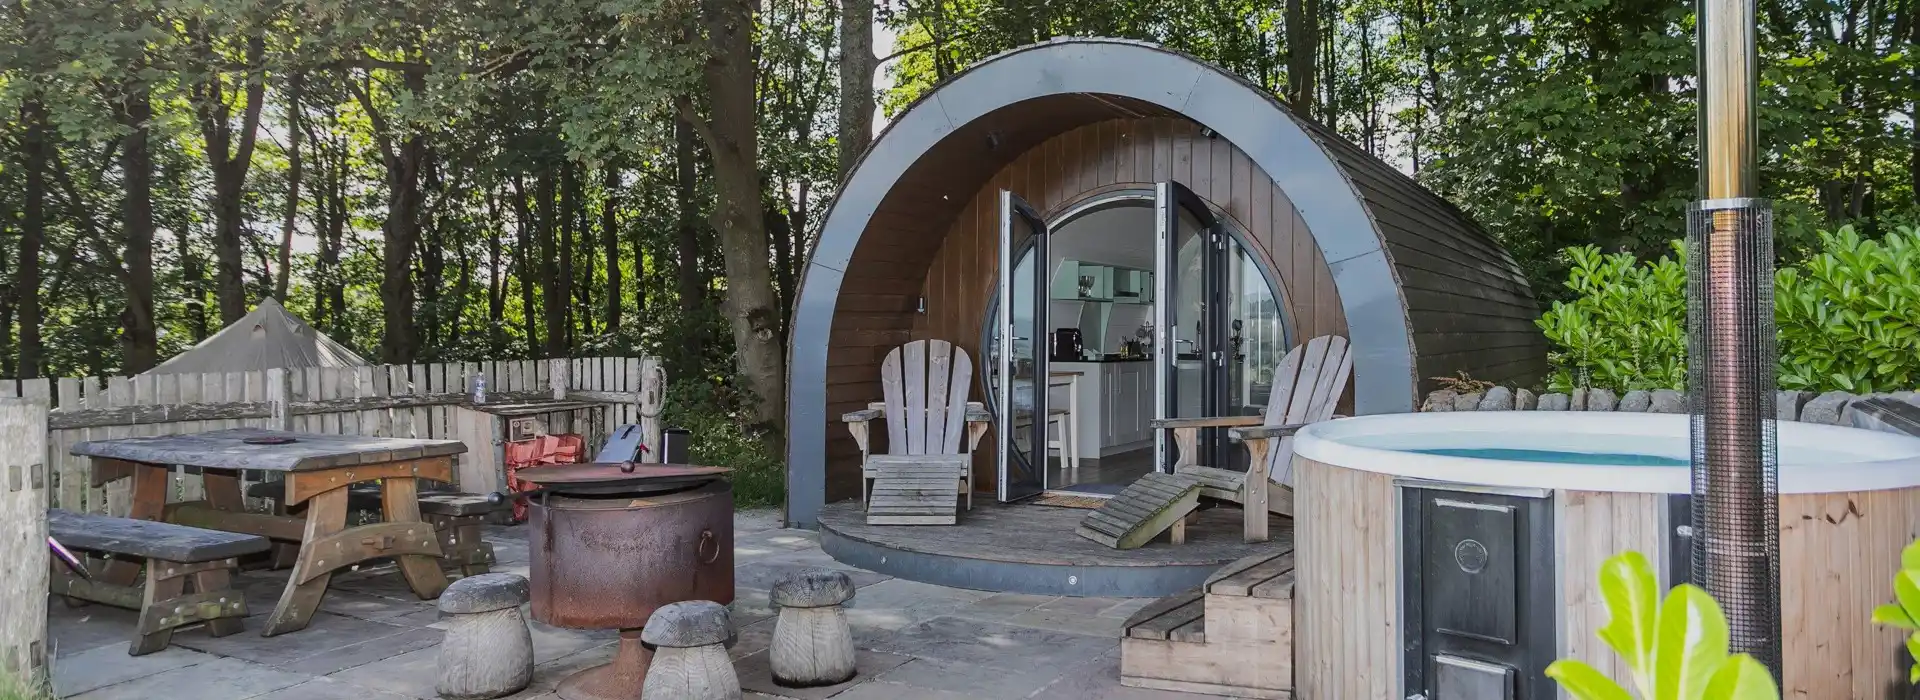 Camping and glamping pods near Bolton Abbey